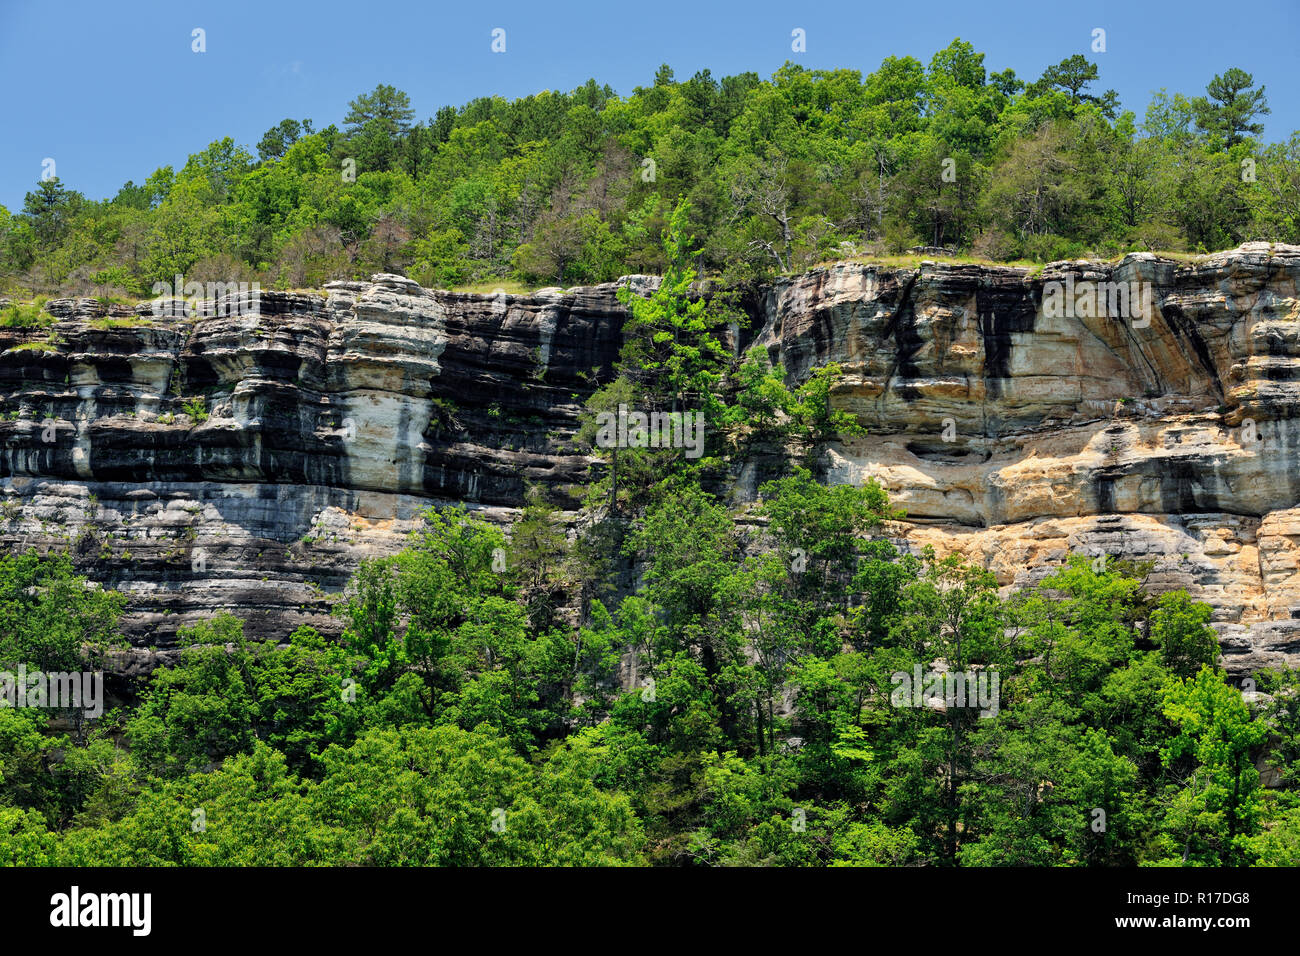 Sandstone bluffs and trees overlooking the Buffalo National River, Buffalo National River- Ozark Unit, Arkansas, USA Stock Photo